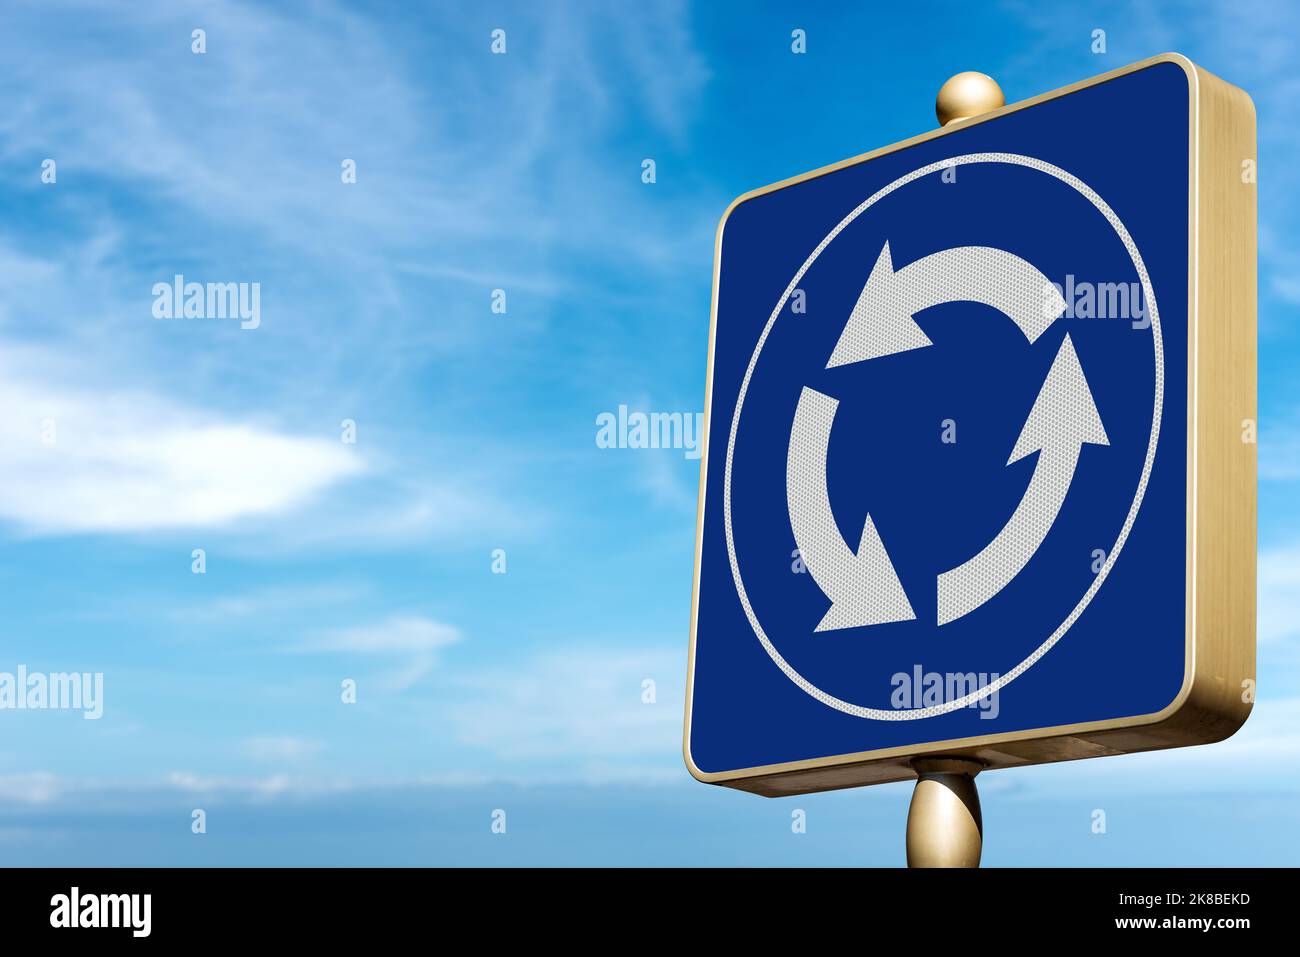 Close-up of a blue and white roundabout road sign against a clear blue sky with clouds and copy space. Europe, Photography. Stock Photo